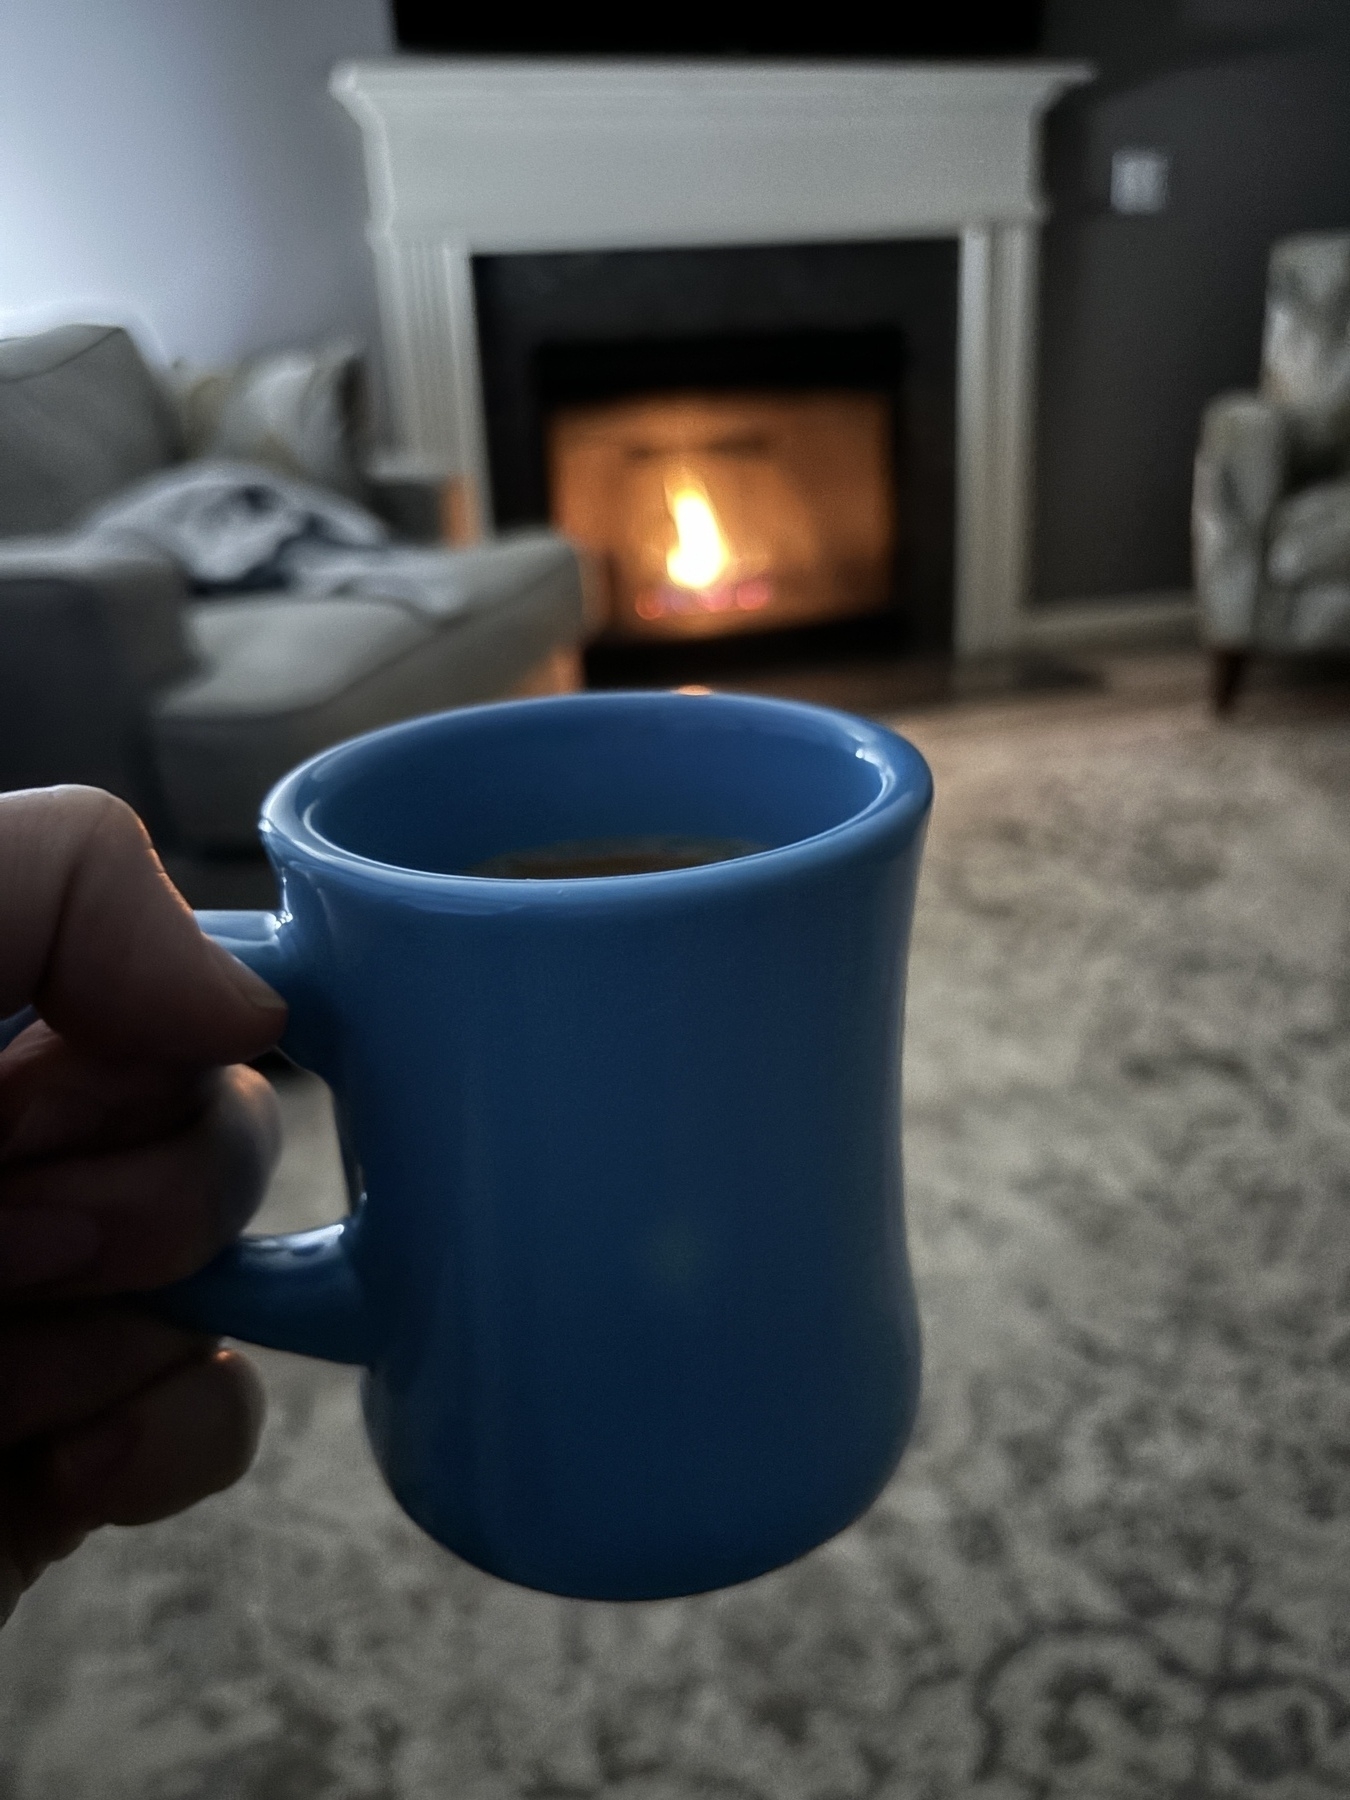 A light blue mug in front of a fireplace